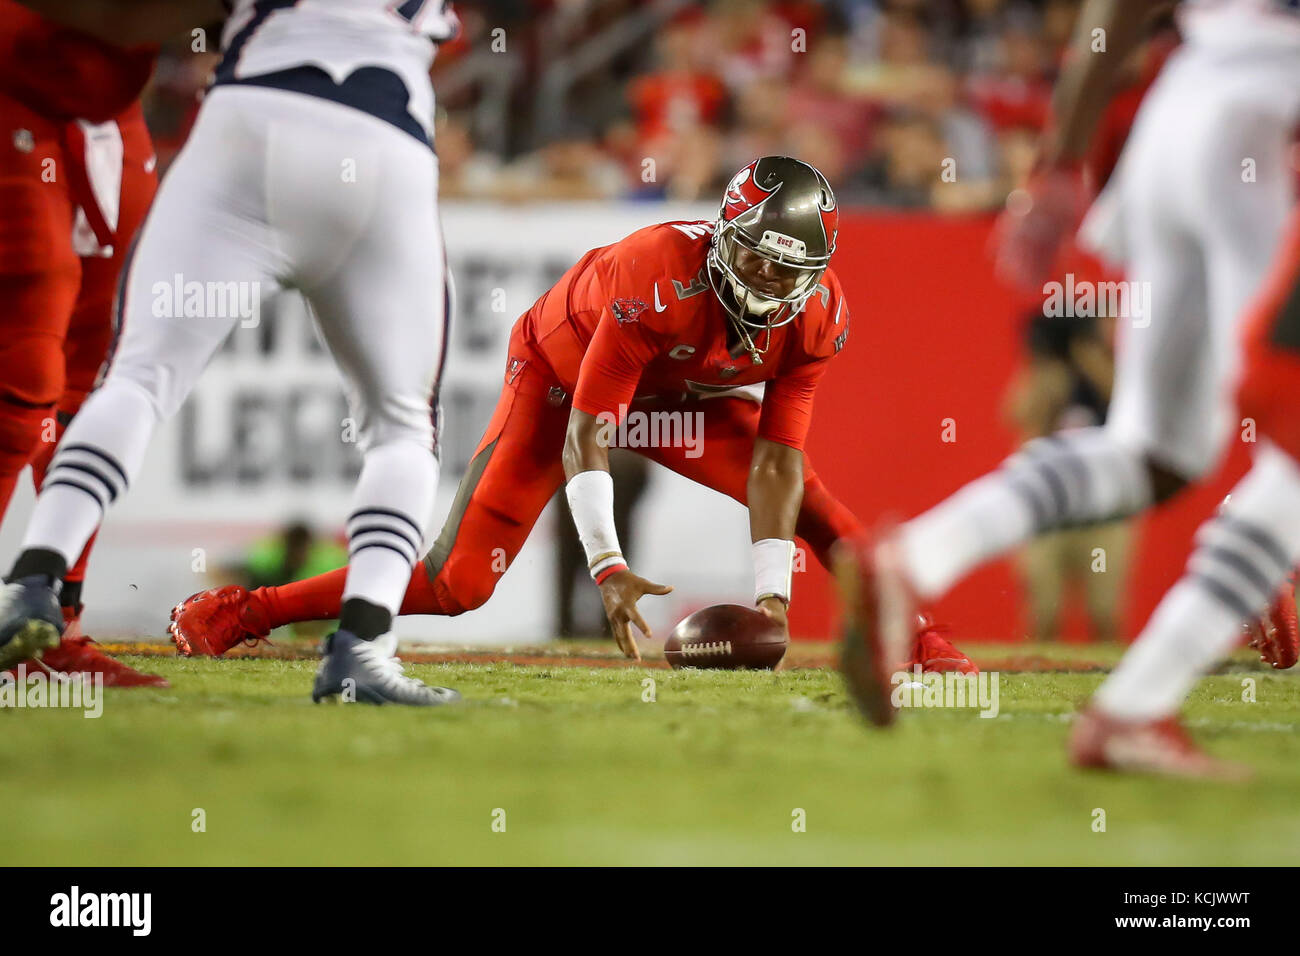 Tampa, Florida, USA. 5th Oct, 2017. MONICA HERNDON | Times.Tampa Bay Buccaneers quarterback Jameis Winston (3) recovers a bobbled snap, passes incomplete in the fourth quarter of the Tampa Bay Buccaneers game against the New England Patriots on October 5, 2017 at Raymond James Stadium in Tampa, Fla. The New England Patriots beat the Tampa Bay Buccaneers 19-14. Credit: Monica Herndon/Tampa Bay Times/ZUMA Wire/Alamy Live News Stock Photo